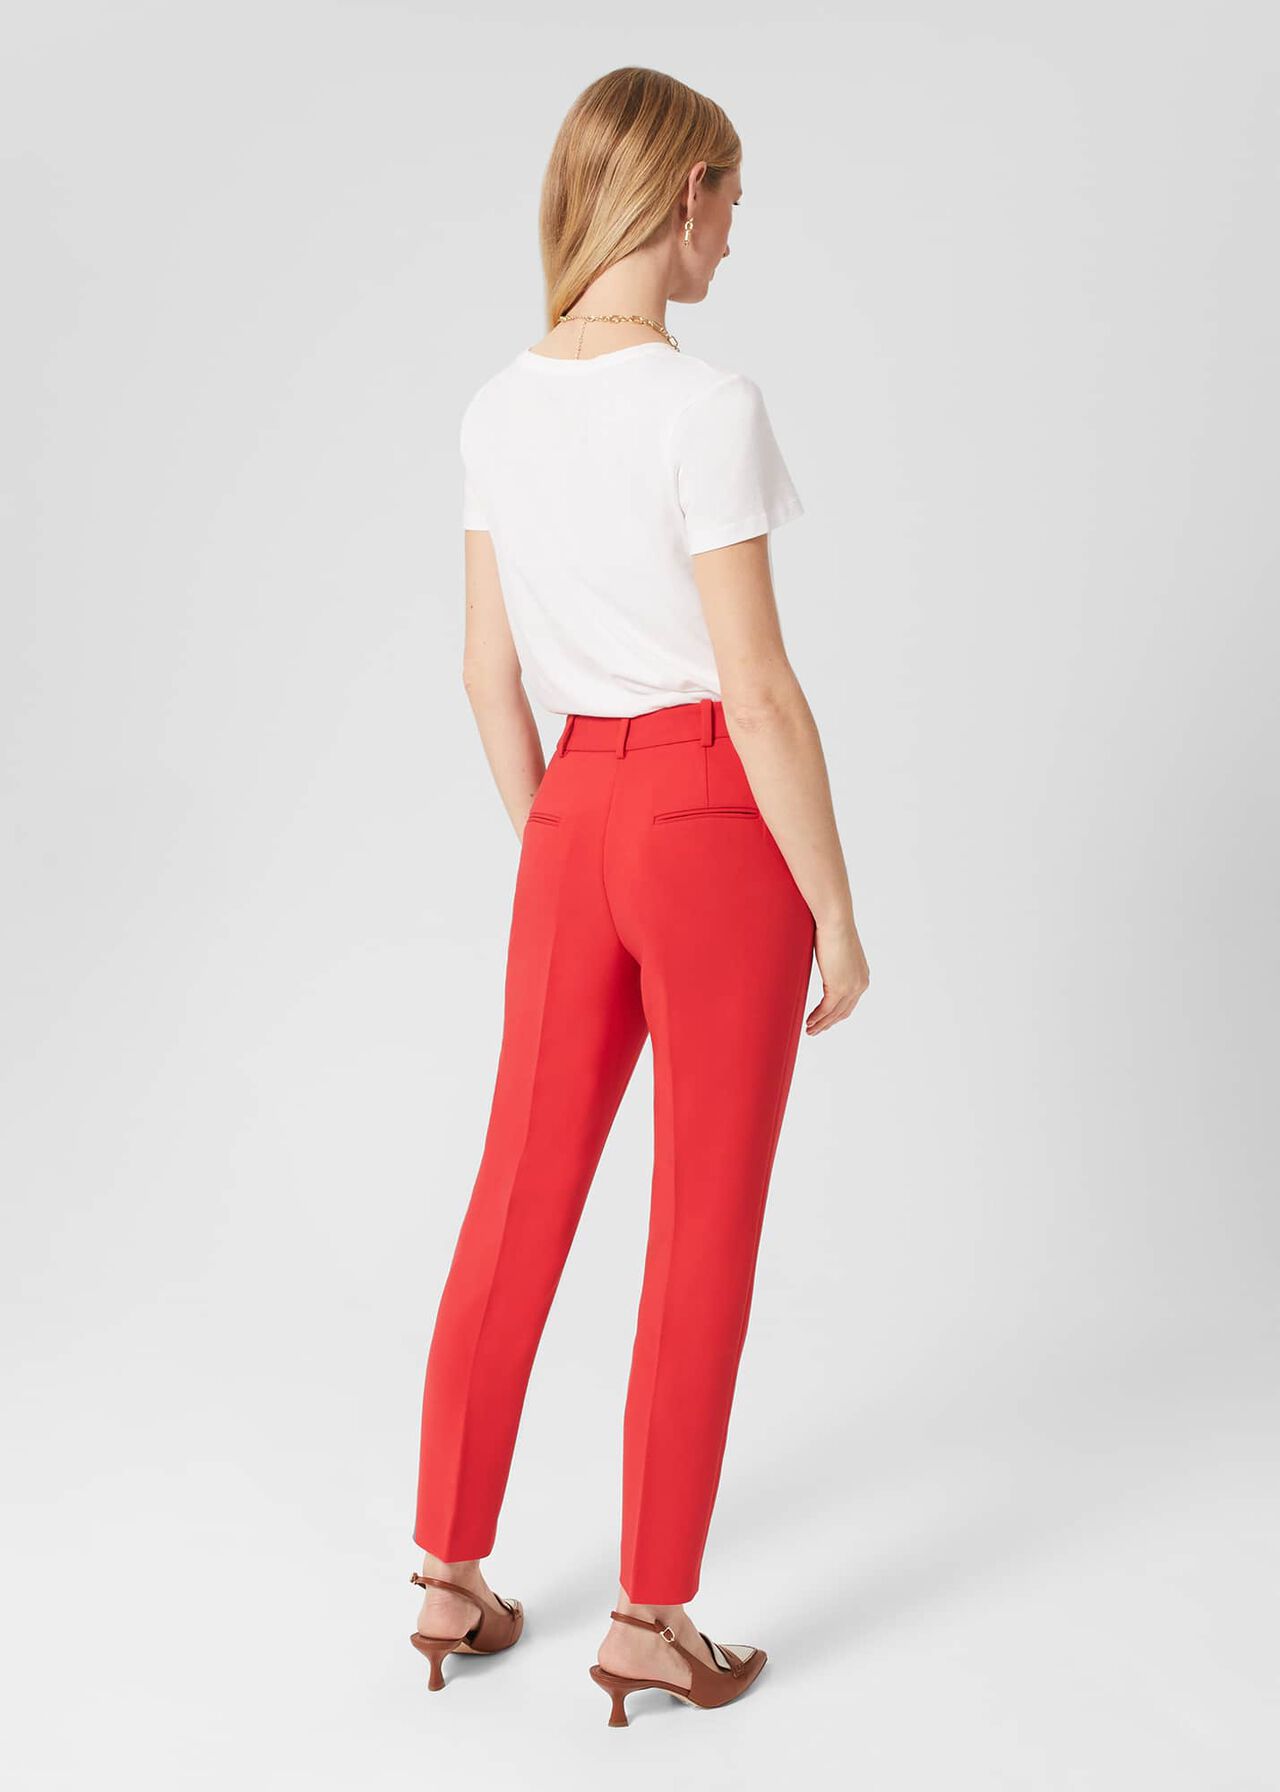 Suki Trousers, Flame Red, hi-res